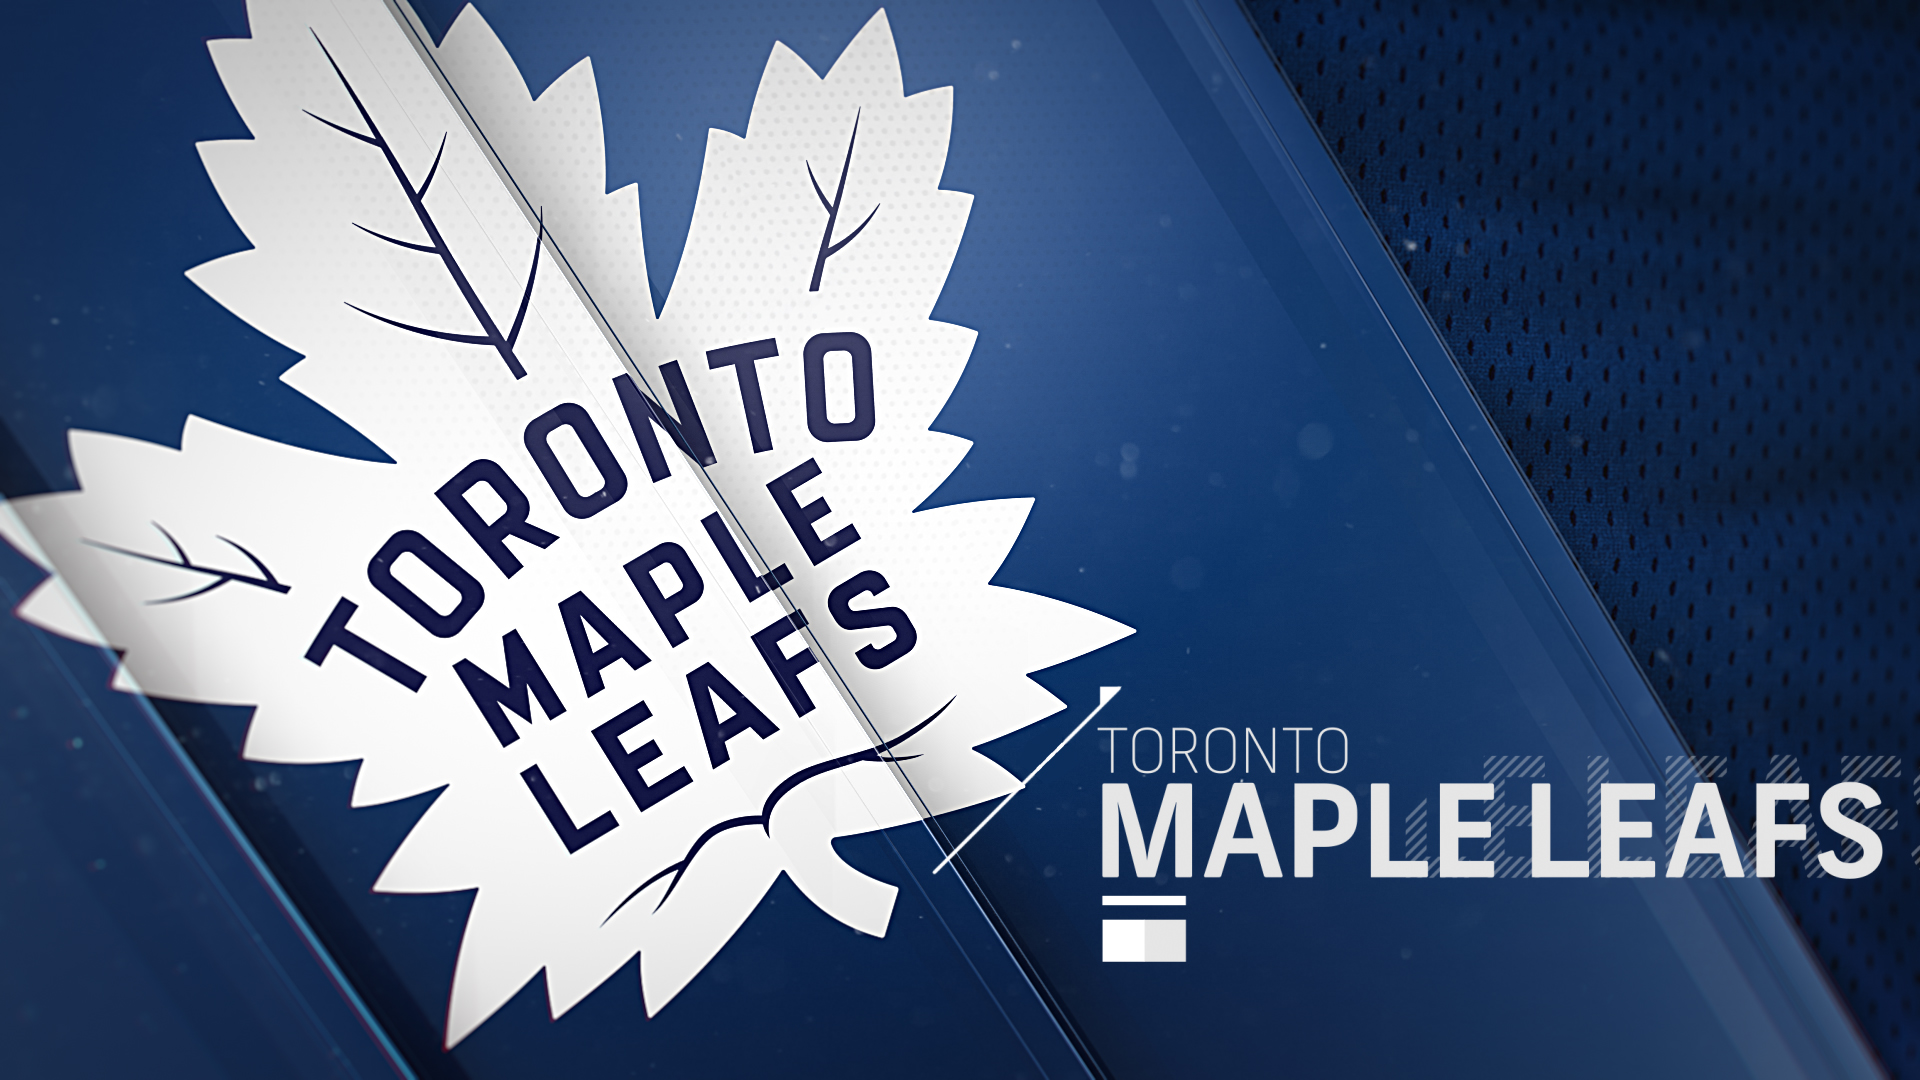 Toronto Maple Leafs  Whos your Leafs Nation wallpaper this week DOWNLOAD  httpbitly2fArKd4  Facebook